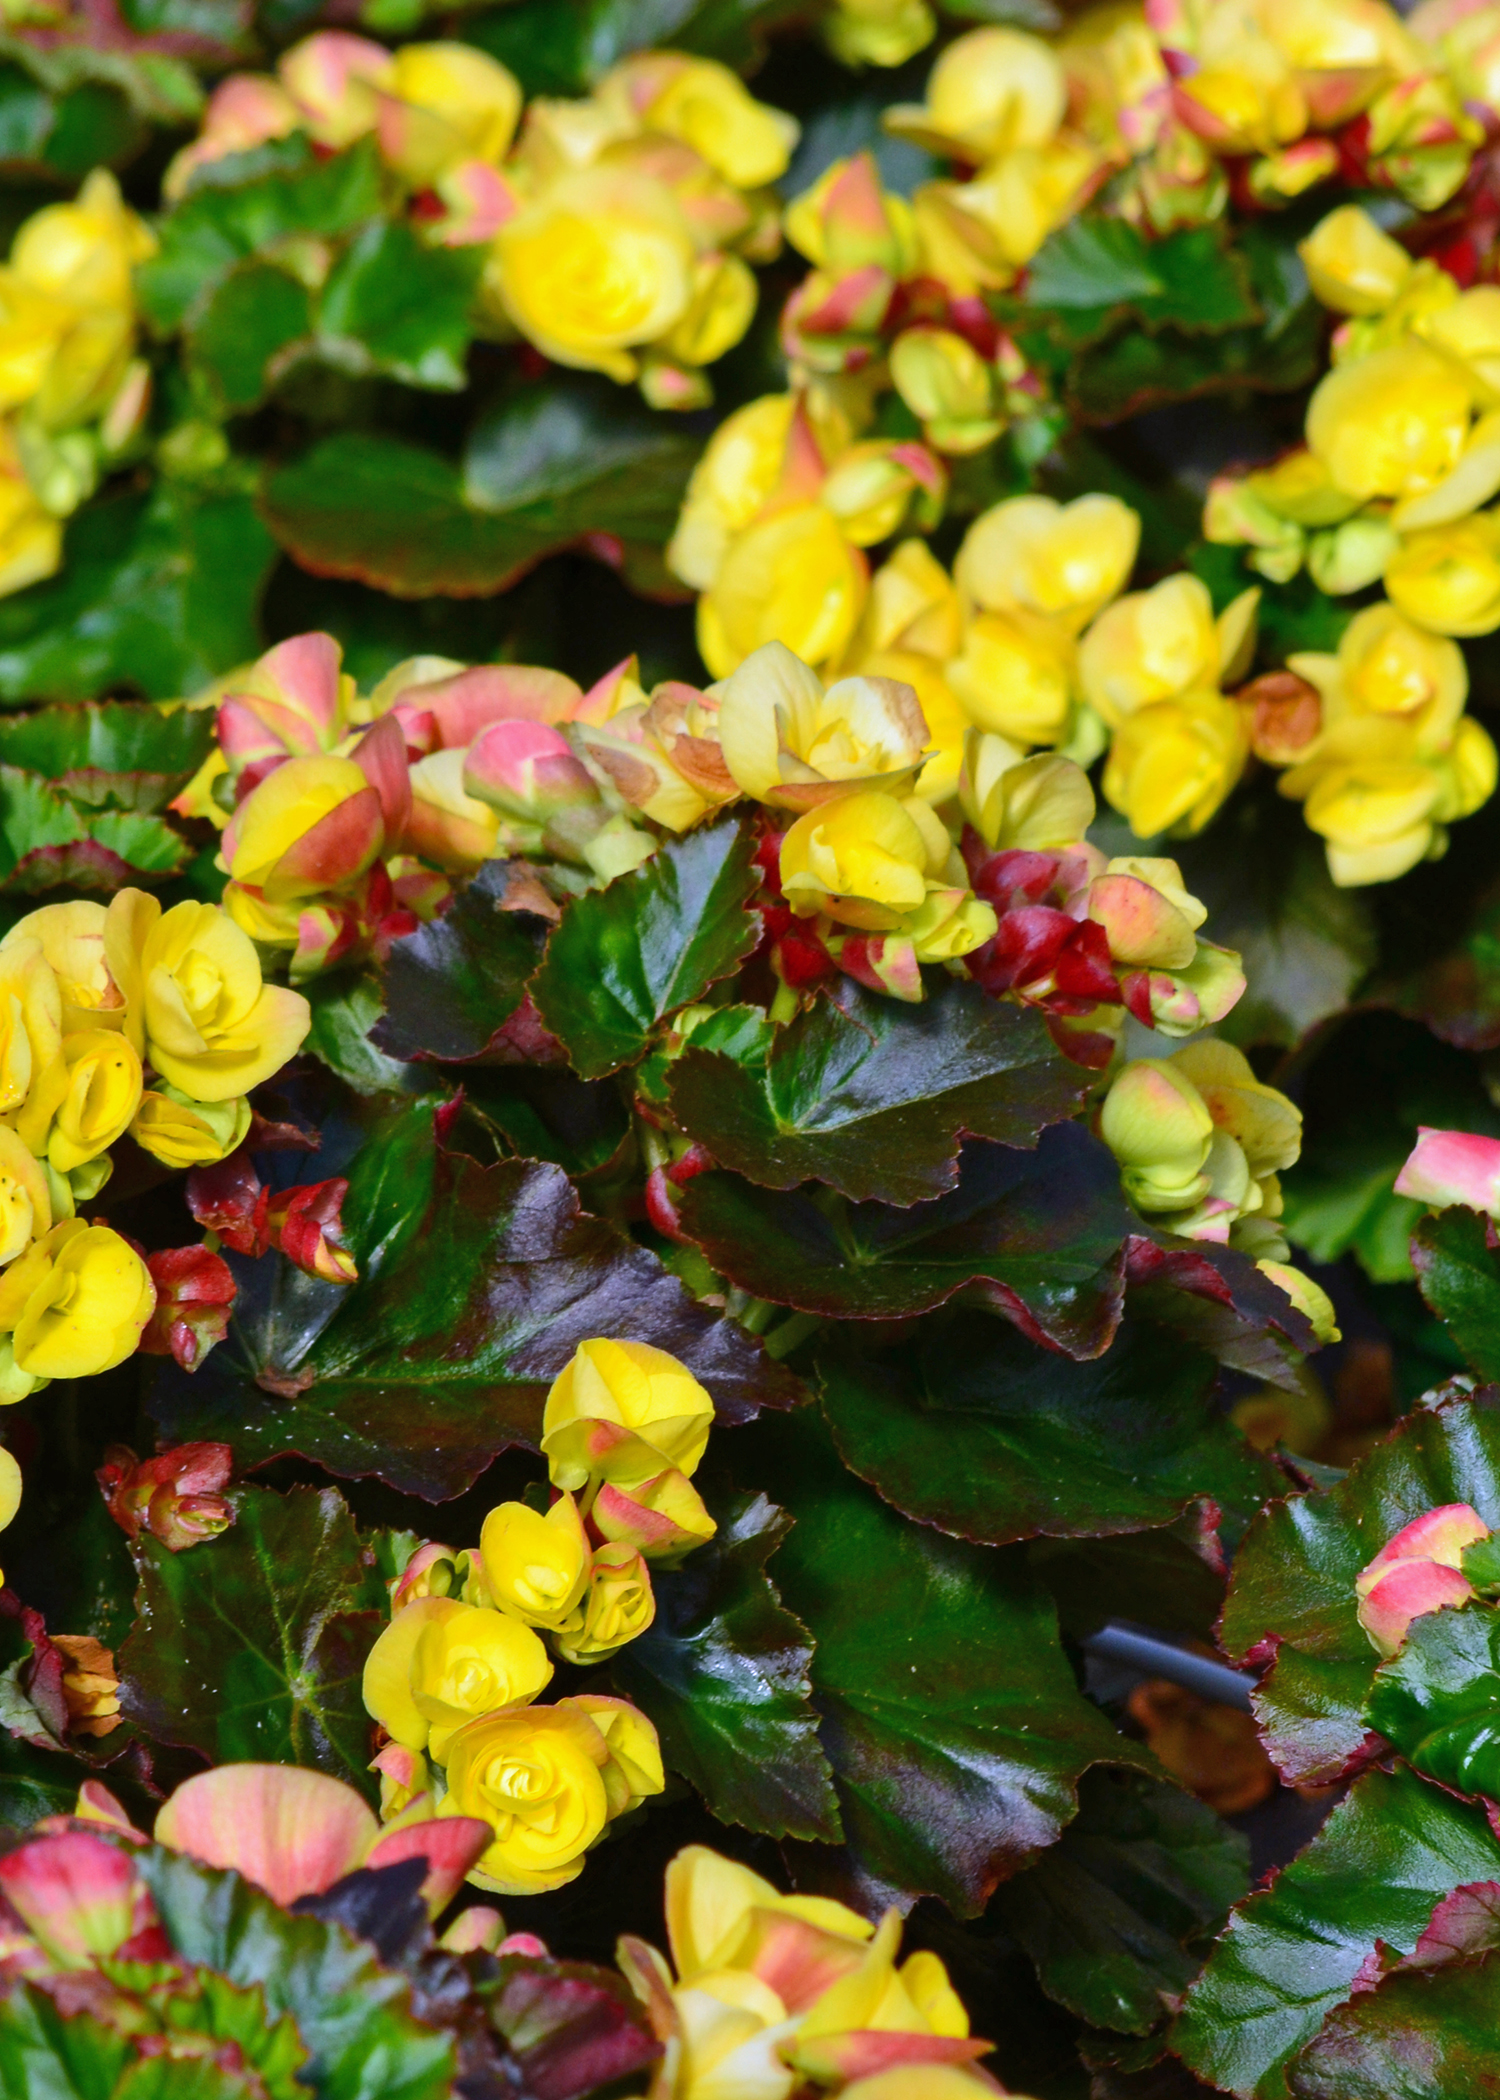 A plant has dozens of small, yellow blooms.